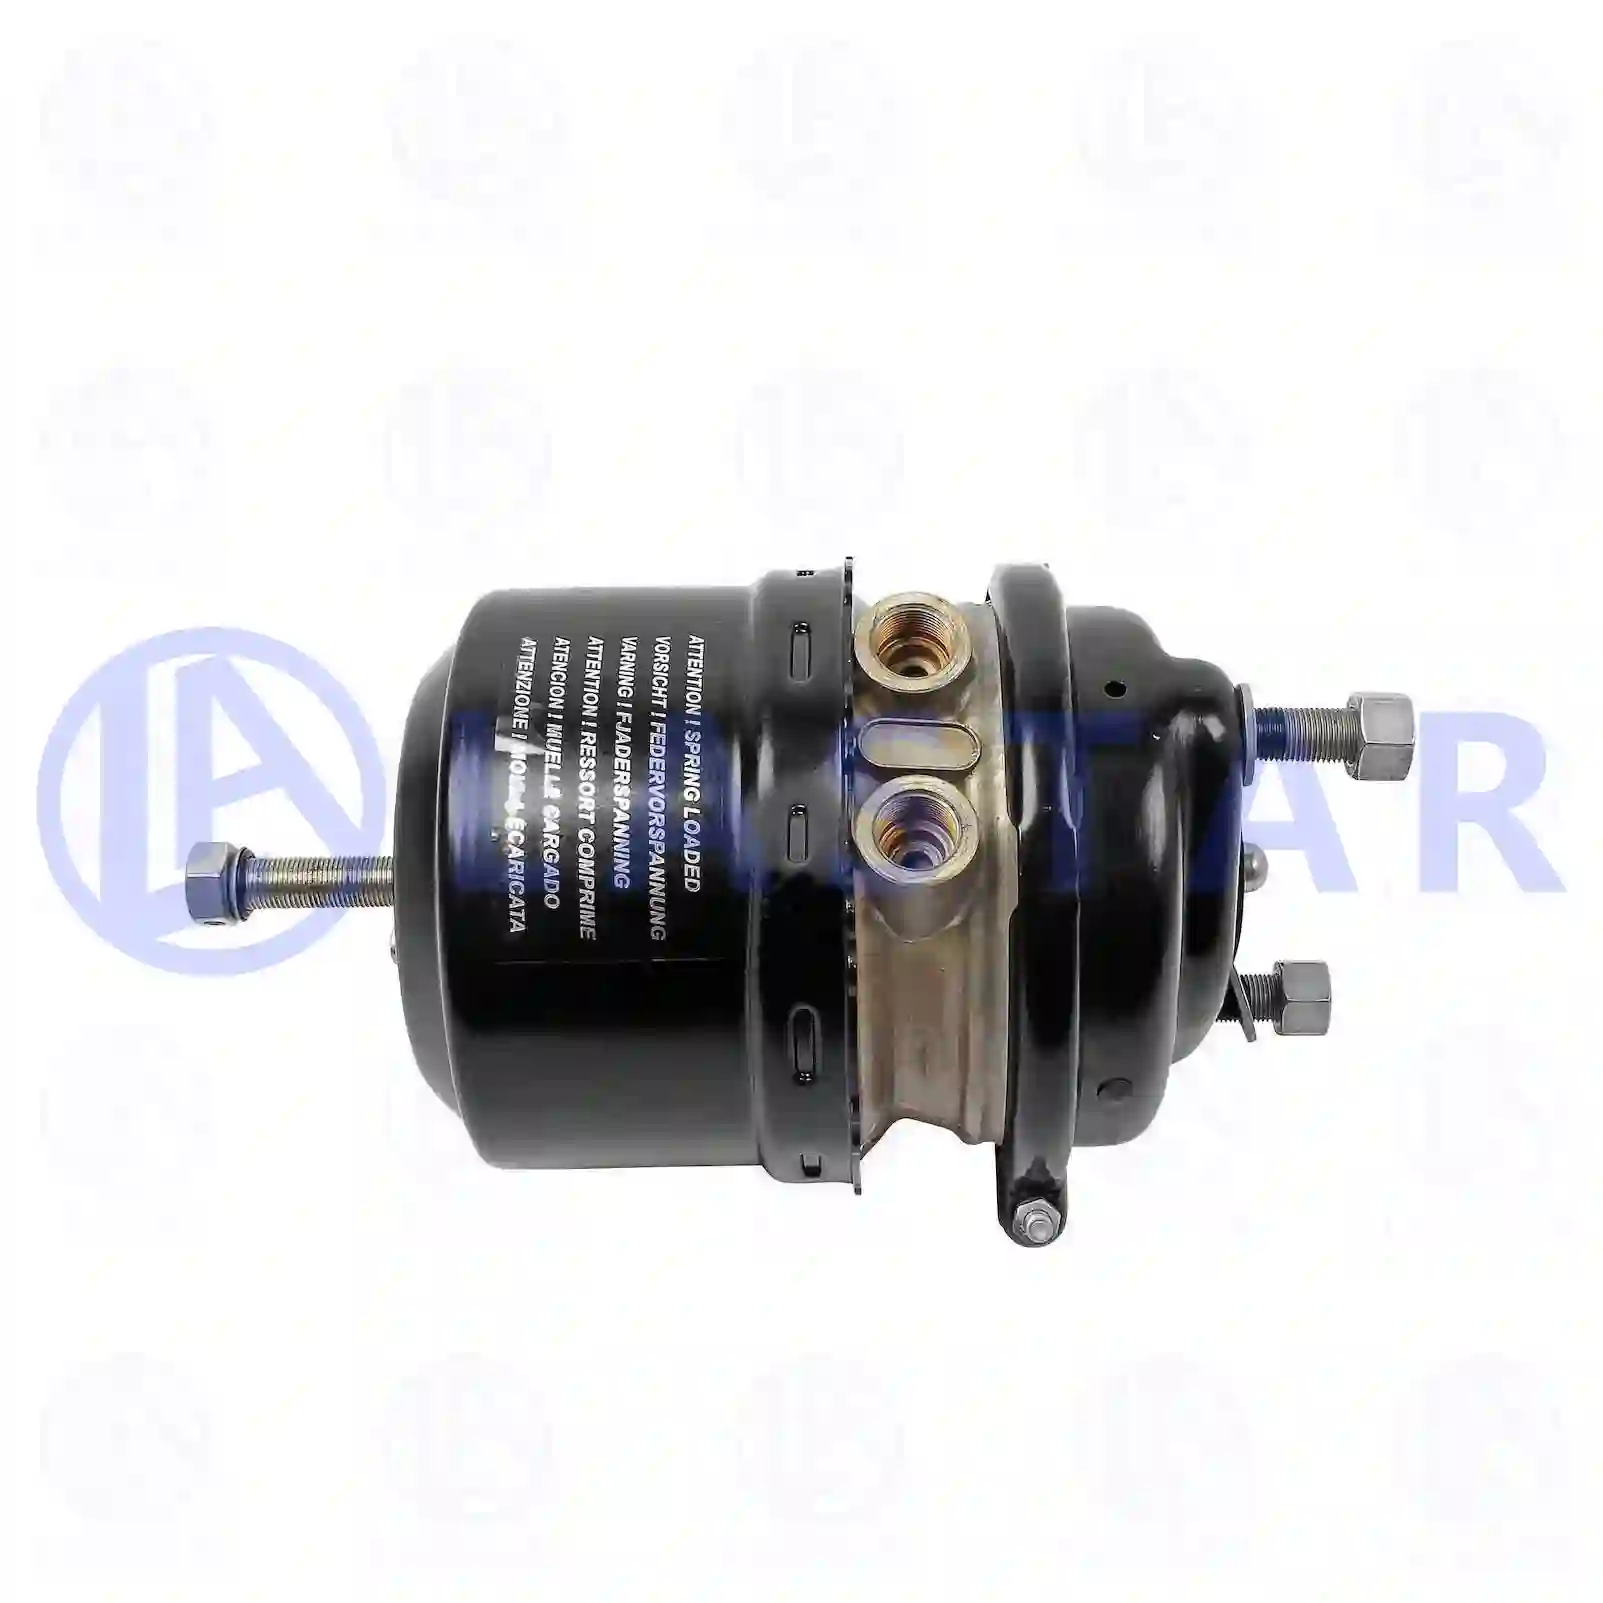 Spring brake cylinder, right, 77715390, 0154209118, 0204204218, 0204204318, , , ||  77715390 Lastar Spare Part | Truck Spare Parts, Auotomotive Spare Parts Spring brake cylinder, right, 77715390, 0154209118, 0204204218, 0204204318, , , ||  77715390 Lastar Spare Part | Truck Spare Parts, Auotomotive Spare Parts